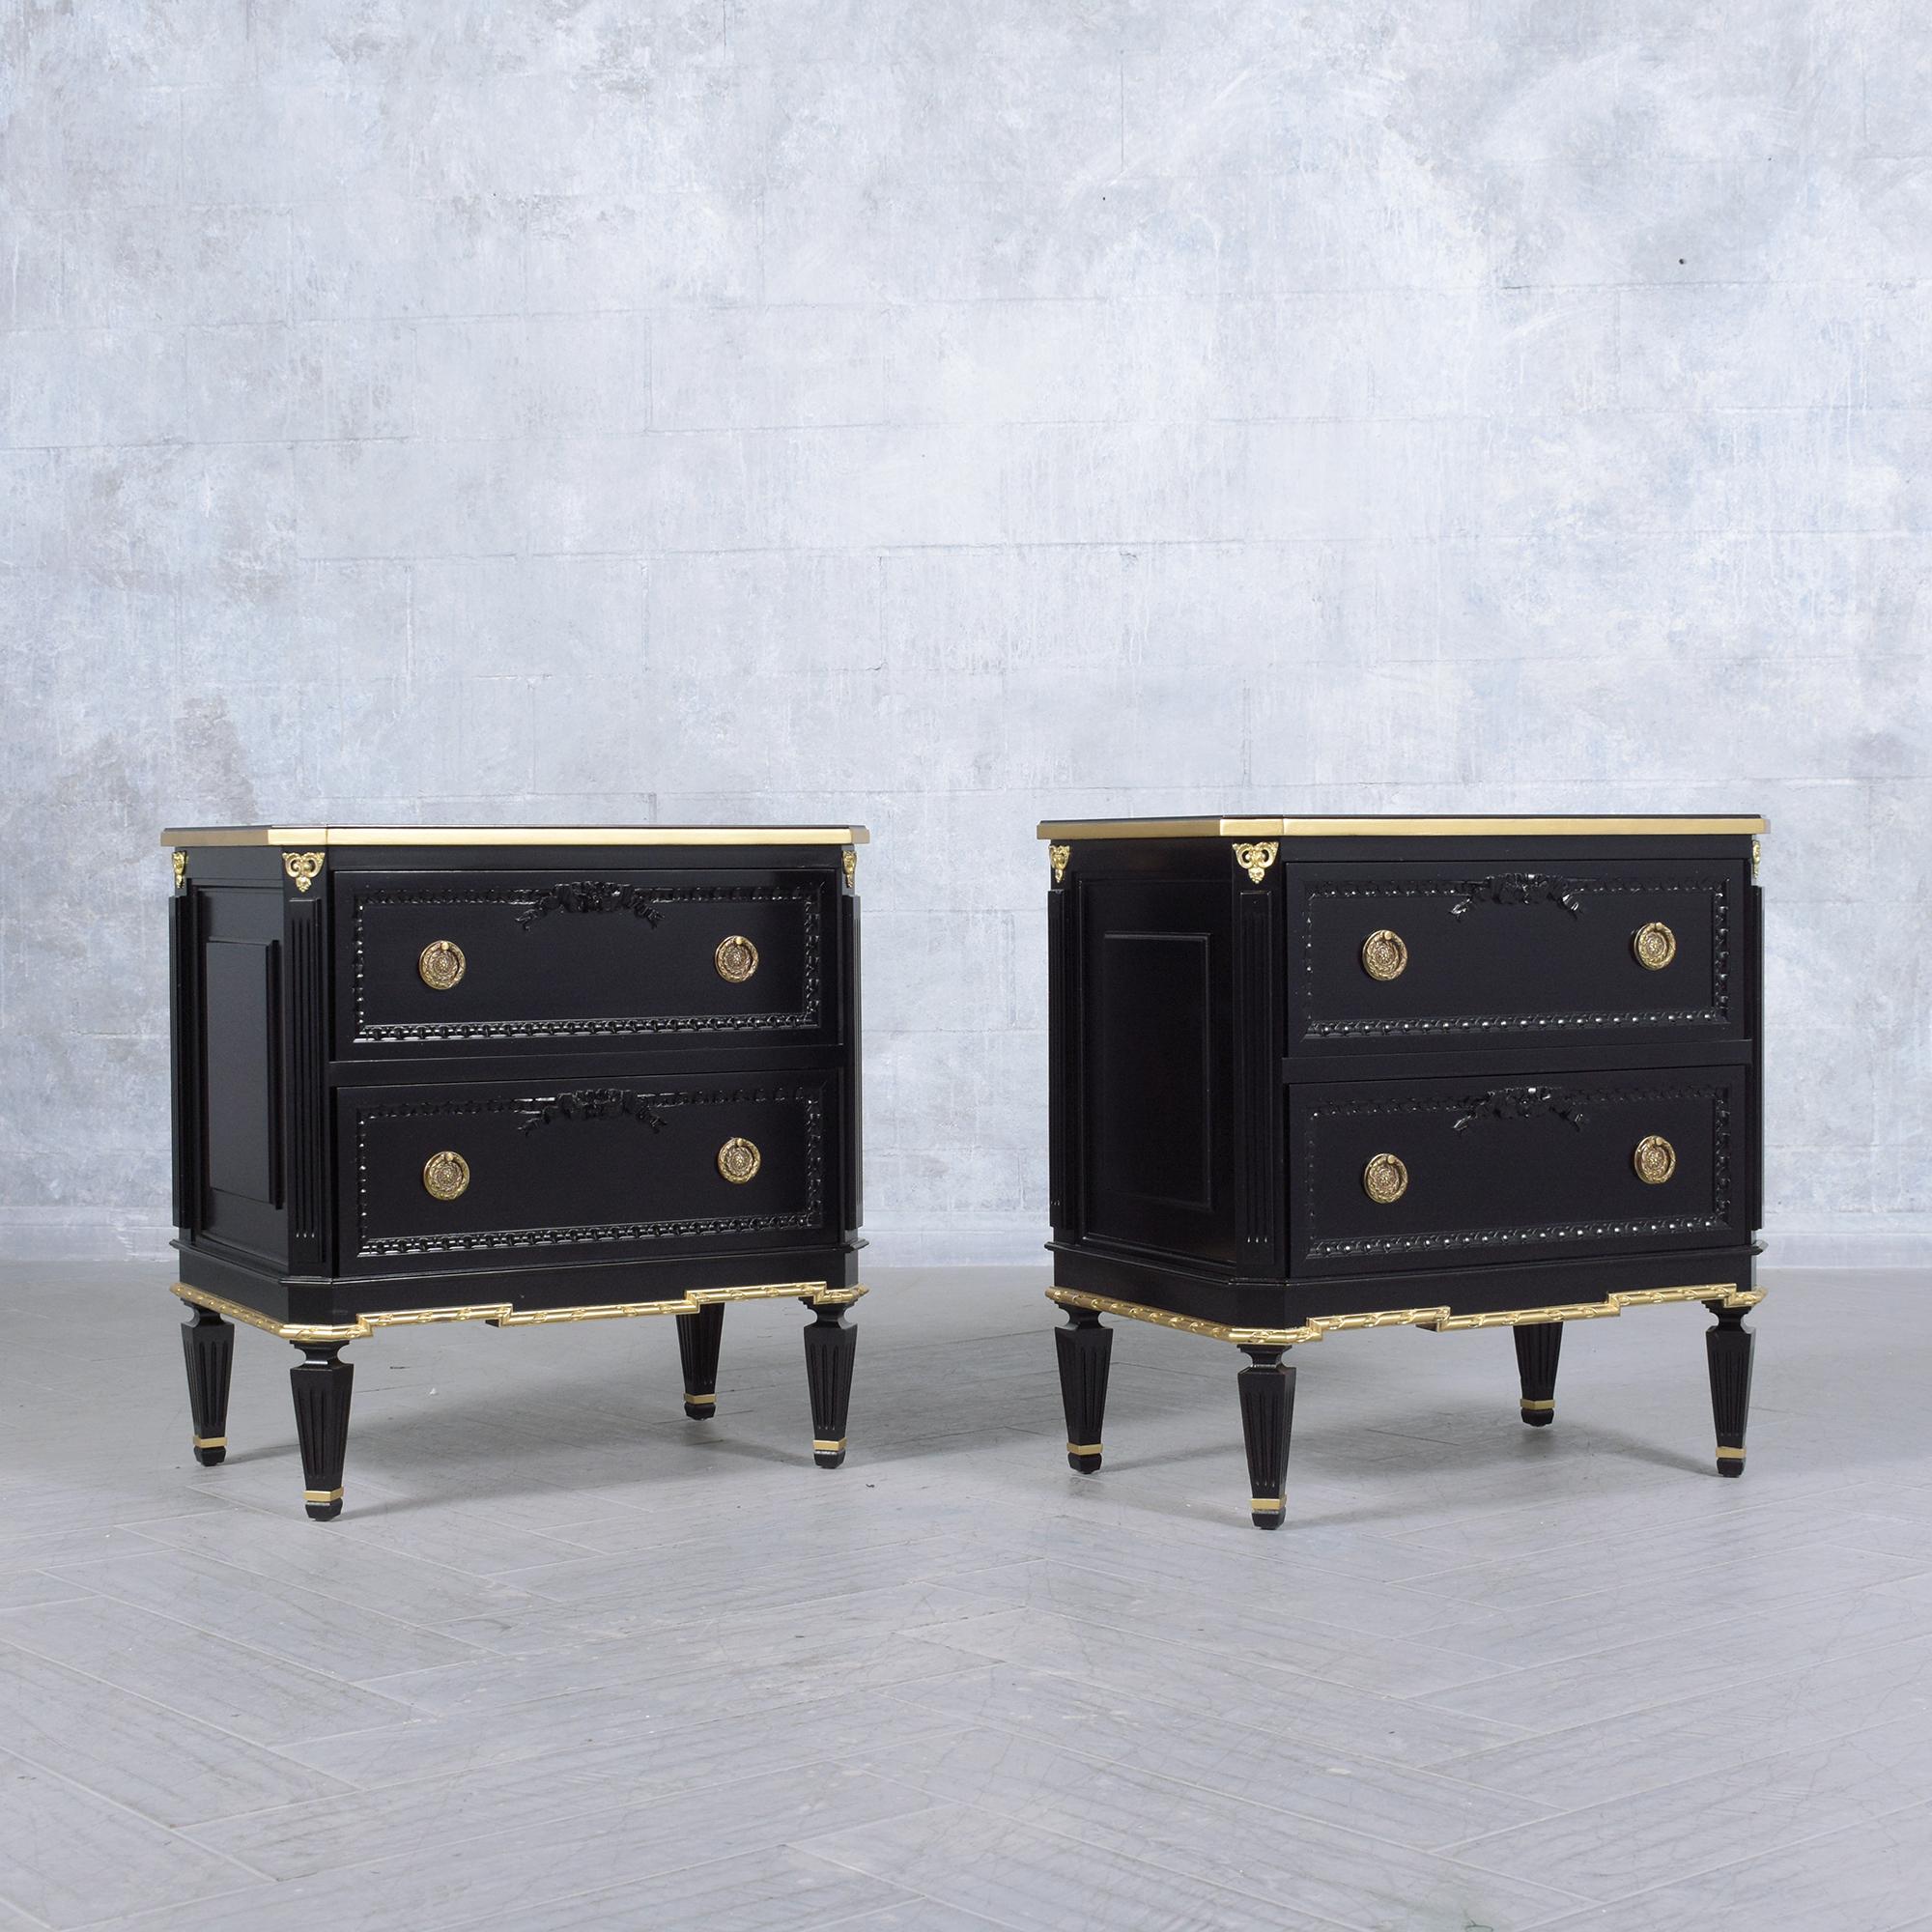 Vintage Louis XVI Mahogany Commodes: Timeless Nightstands for the Modern Home 1